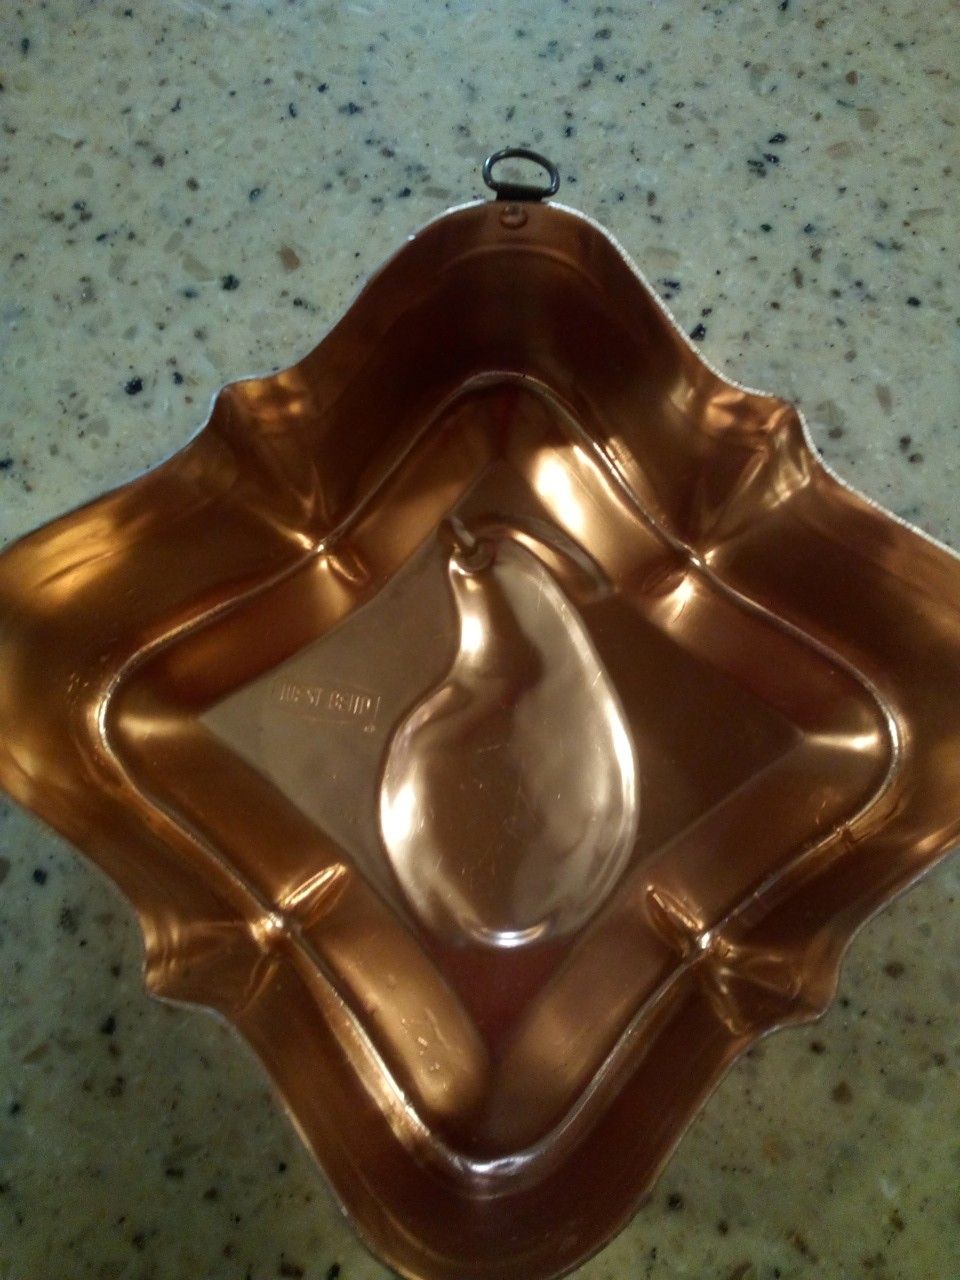 Vintage West bend copper jello mold/3 cup capacity/5.5x5.5x2 inches/ hanging decoration or for jello